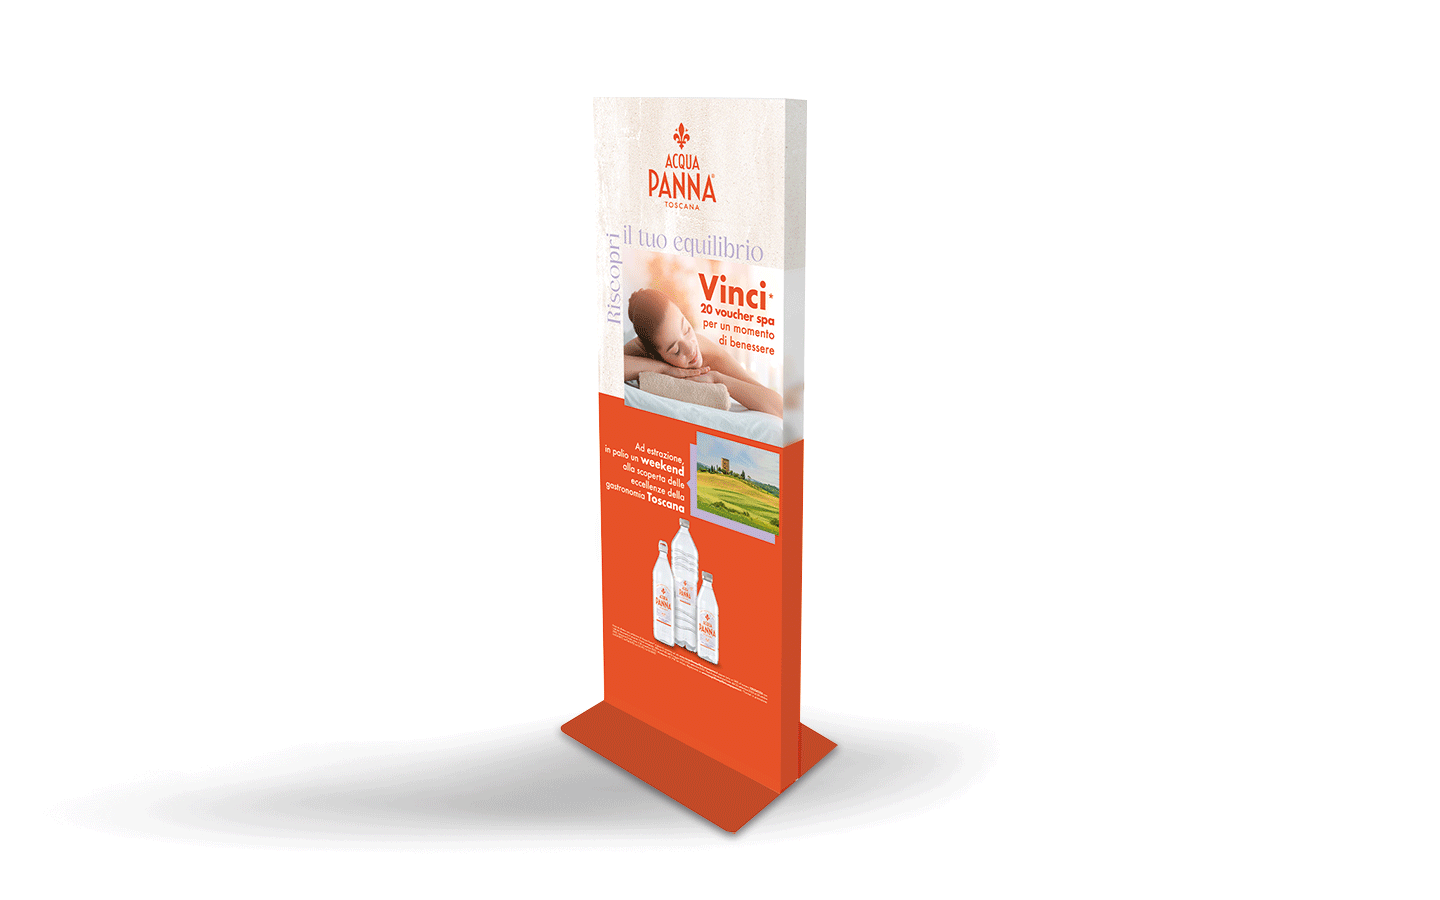 ATC creates the in-store assets for the 2023 Acqua Panna promo, including totems, wobblers, arches and standing display units